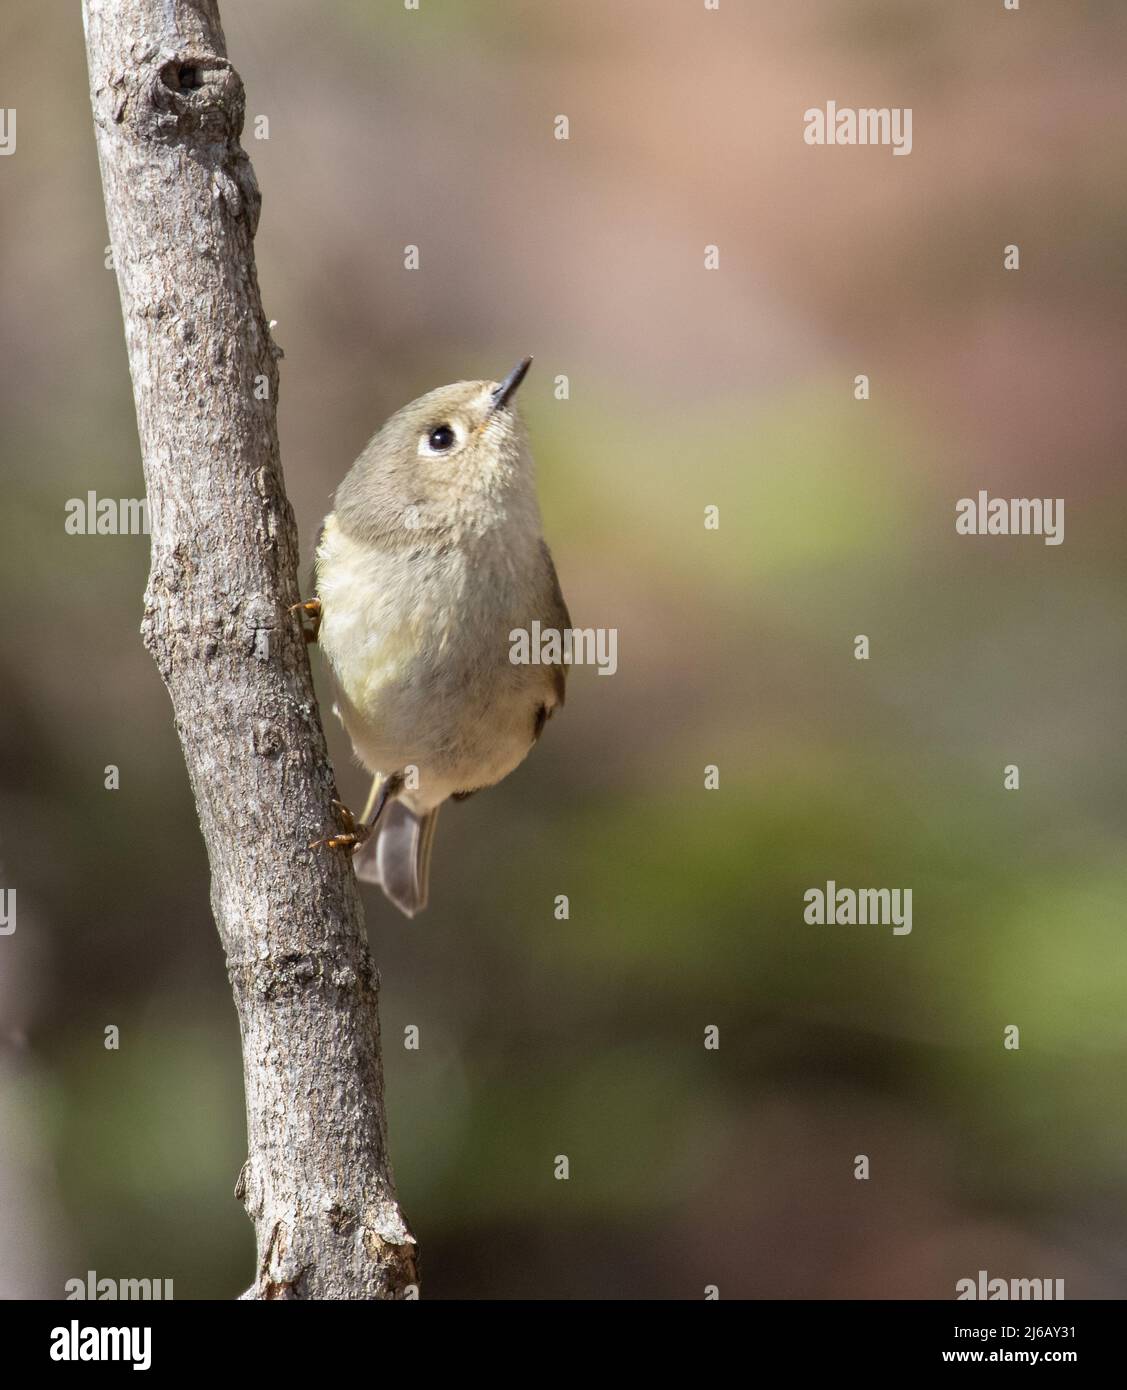 A Ruby-crowned Kinglet closeup  with blurred nature background Stock Photo